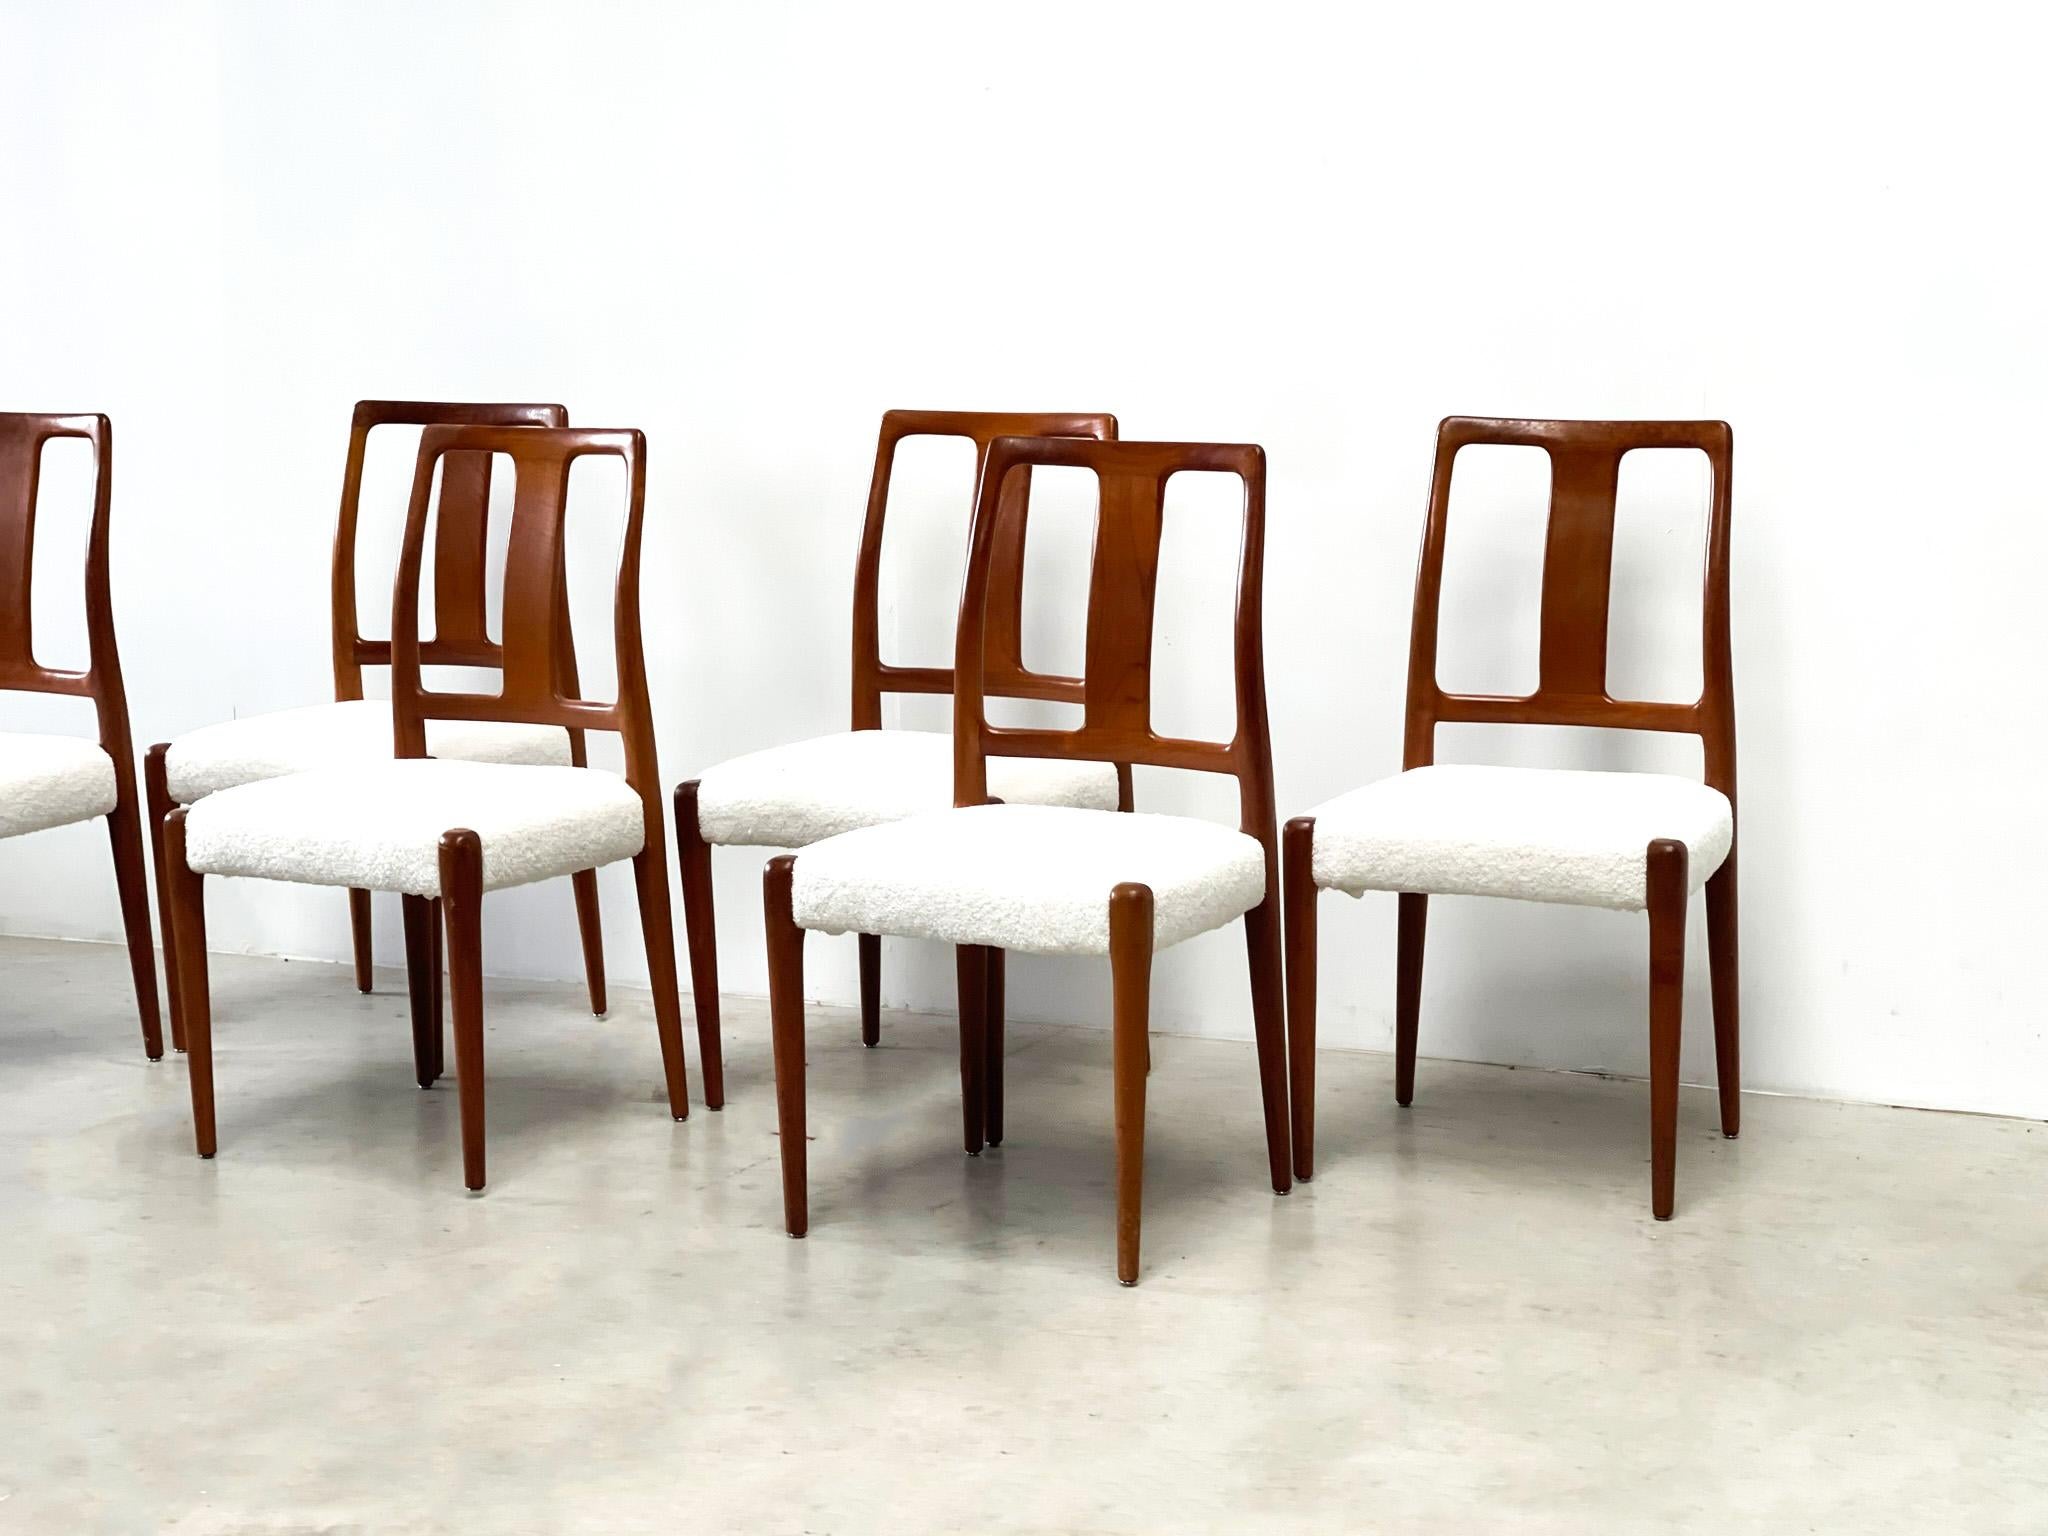 Elegant scandinavian dining chairs.

Beautifully crafted frames.

Reupholstered seats in white bouclé.

Very good condition.

1960s - Denmark

Dimensions:
Height: 80cm/31.49